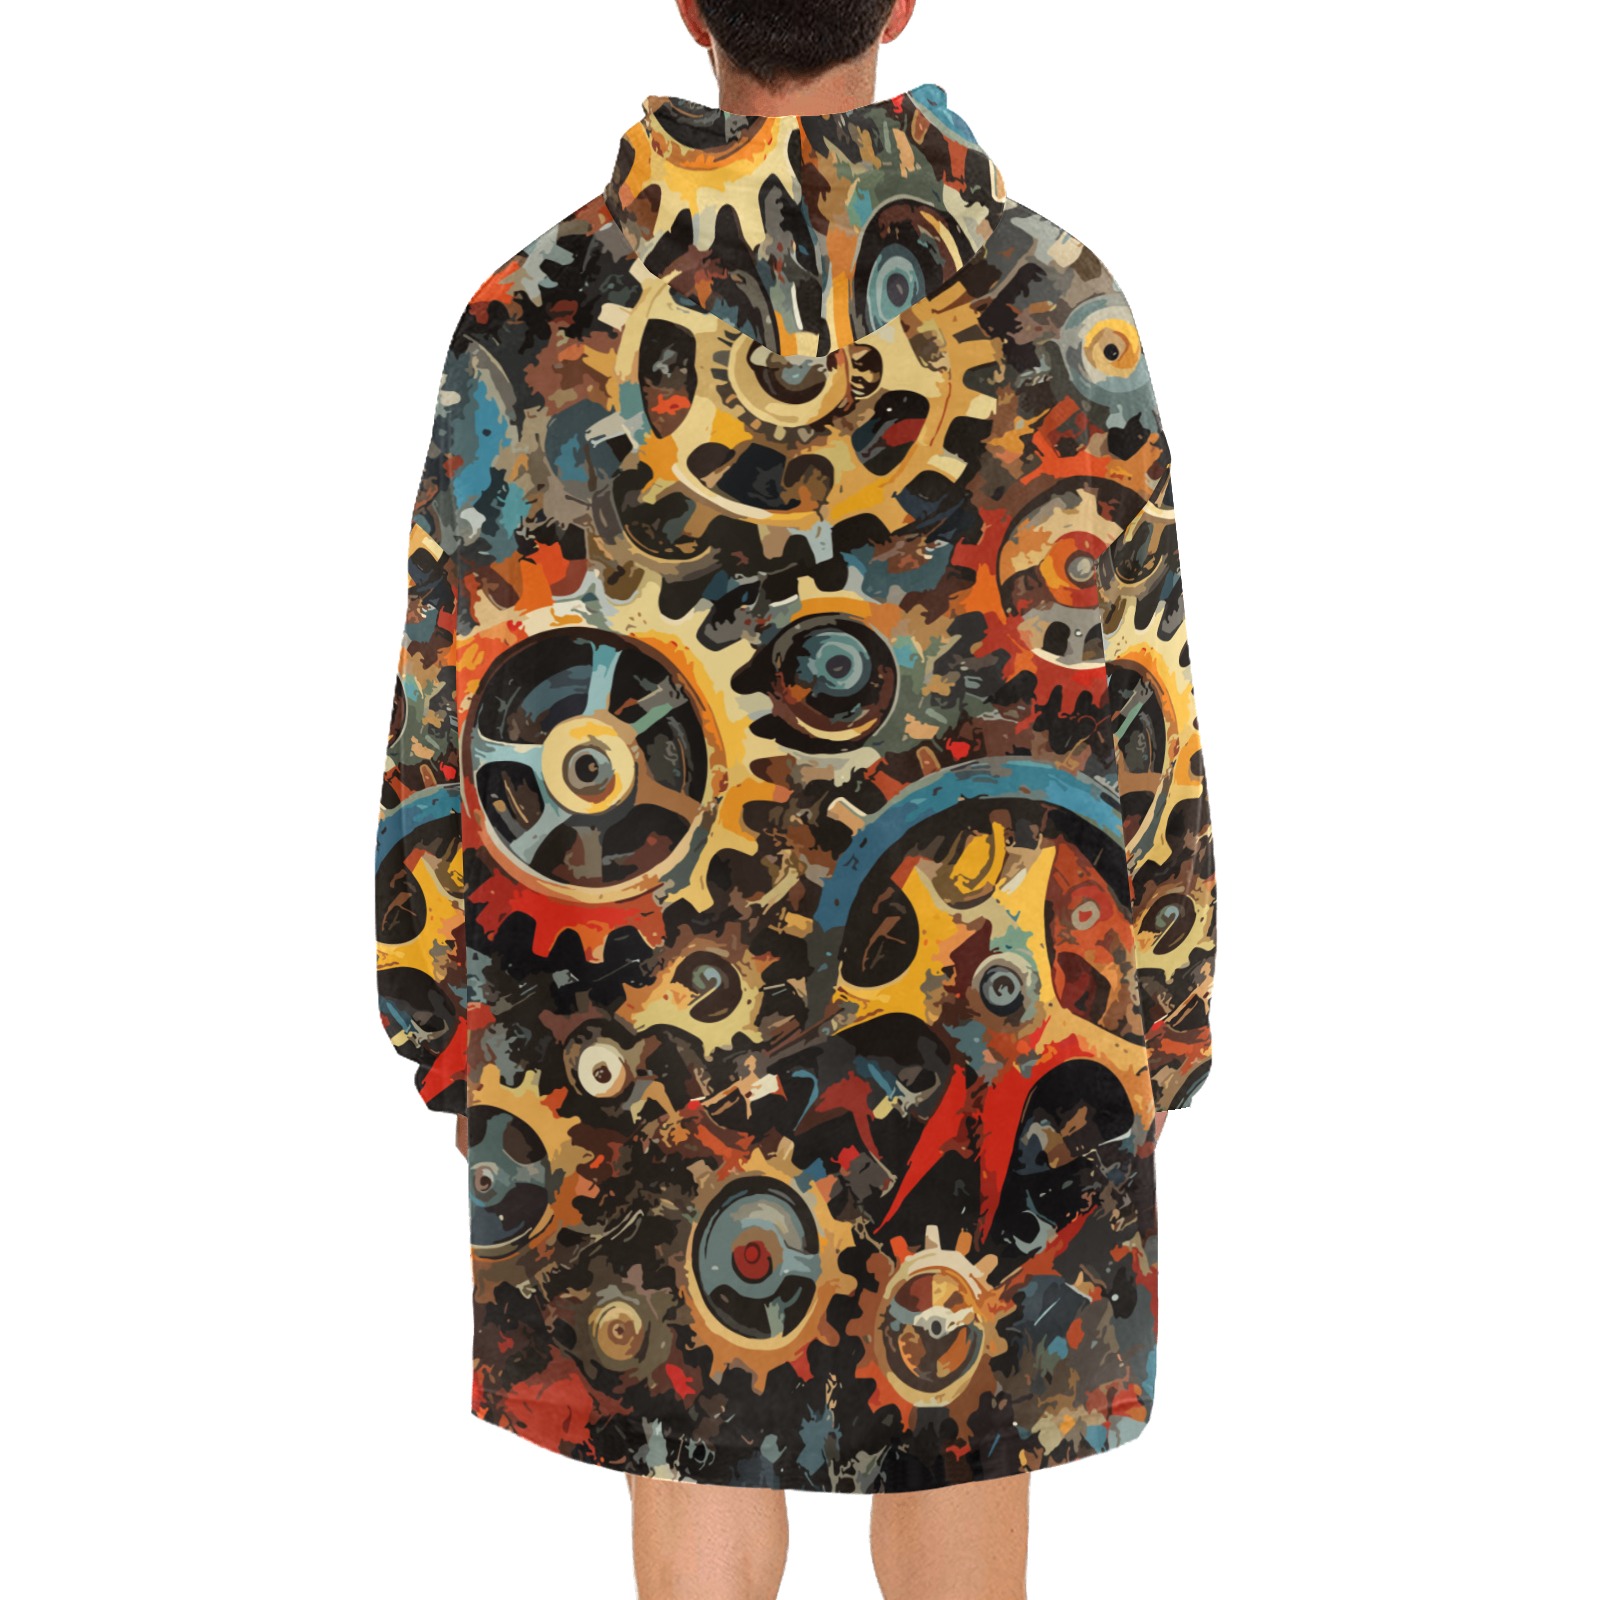 Stunning Mechanical Gear Colorful Abstract Art Blanket Hoodie for Men